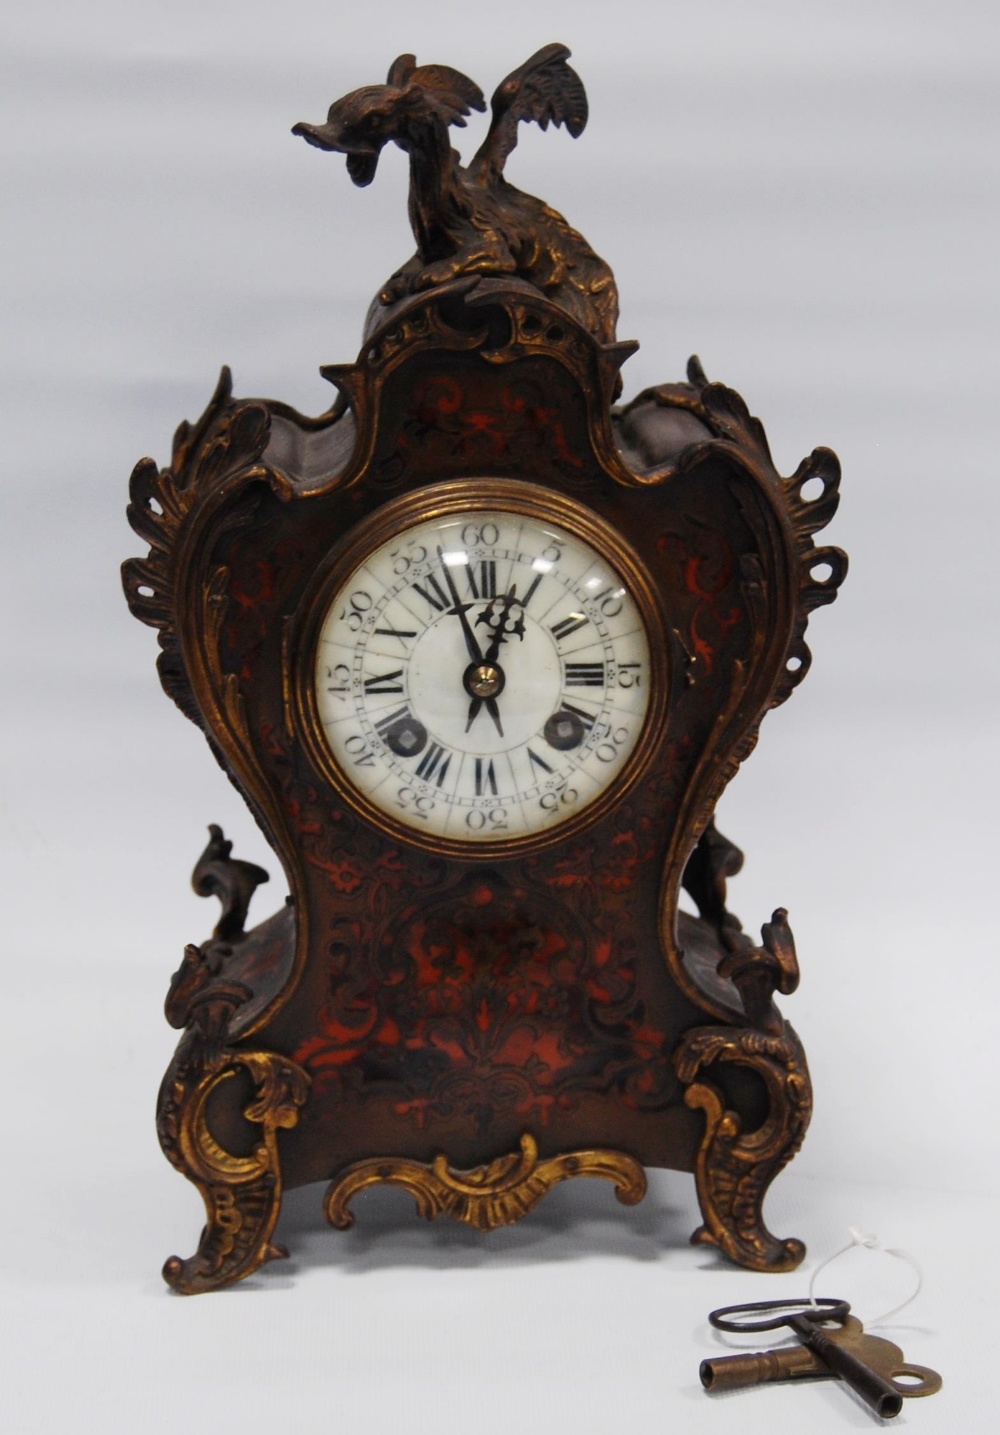 19th century French Boulle work mantel clock with gilt metal dragon surmount above an enamel dial - Image 2 of 11